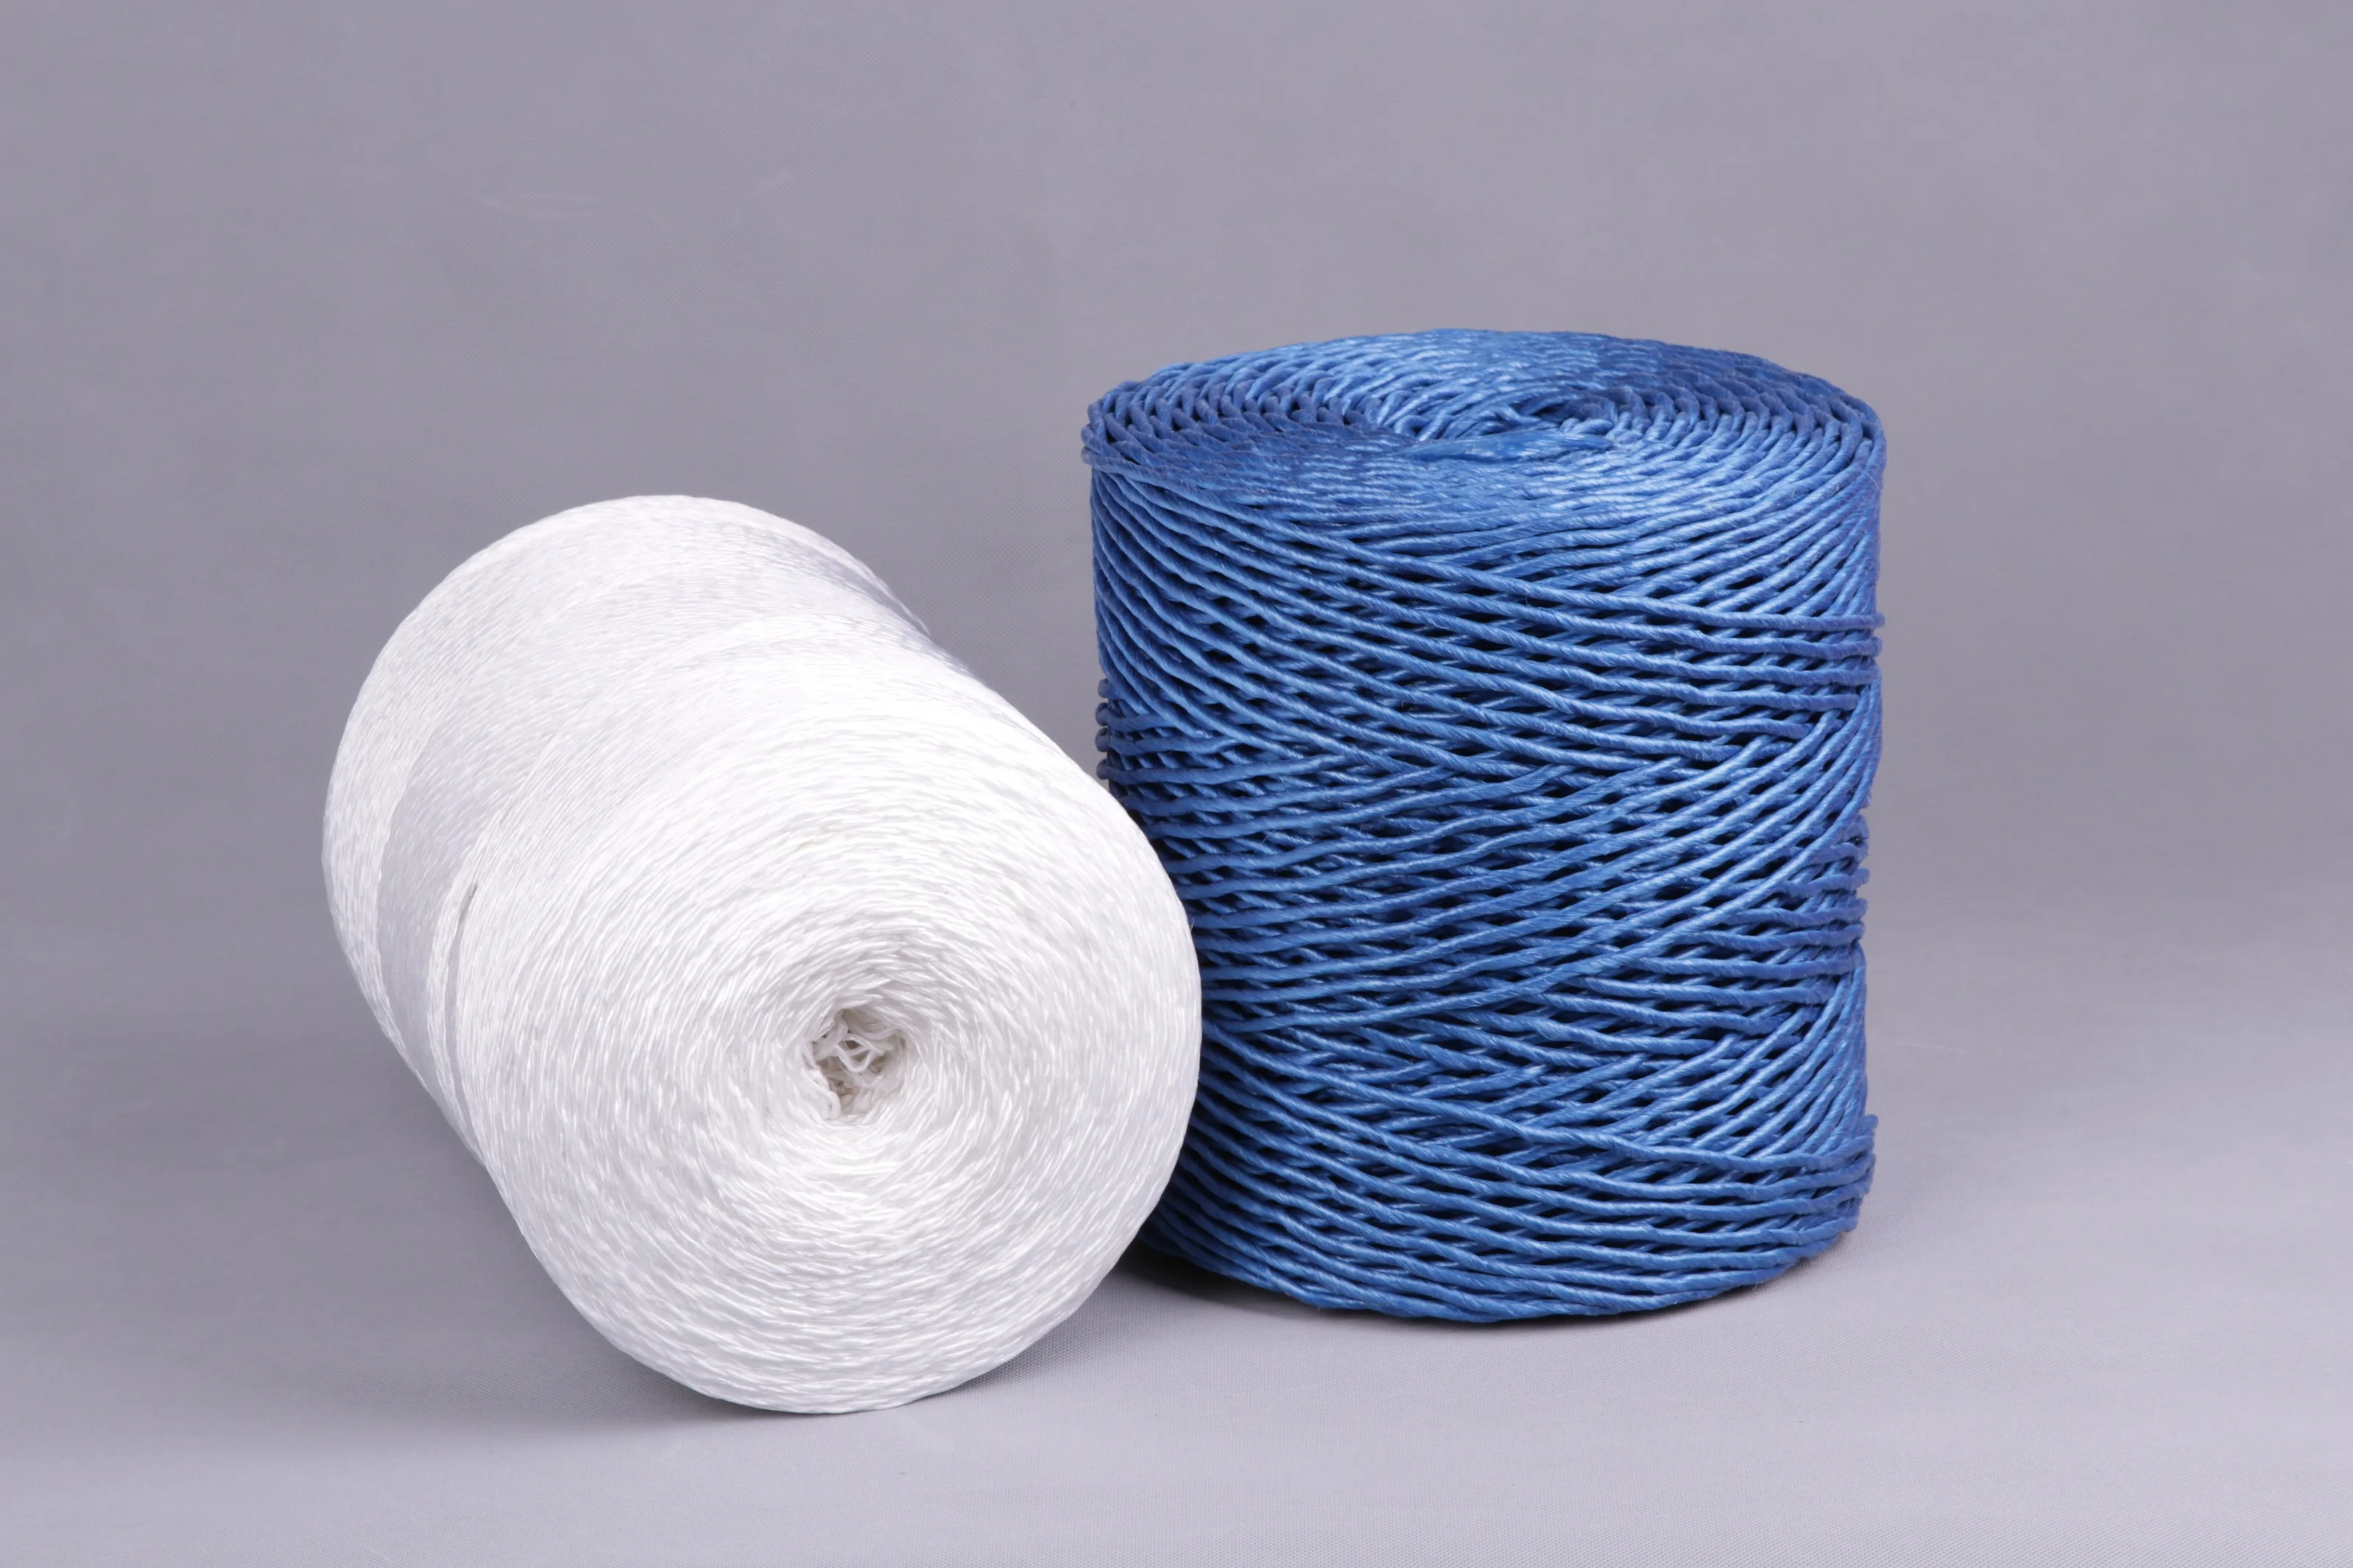 3 strands plastic twine for packaging and bundling